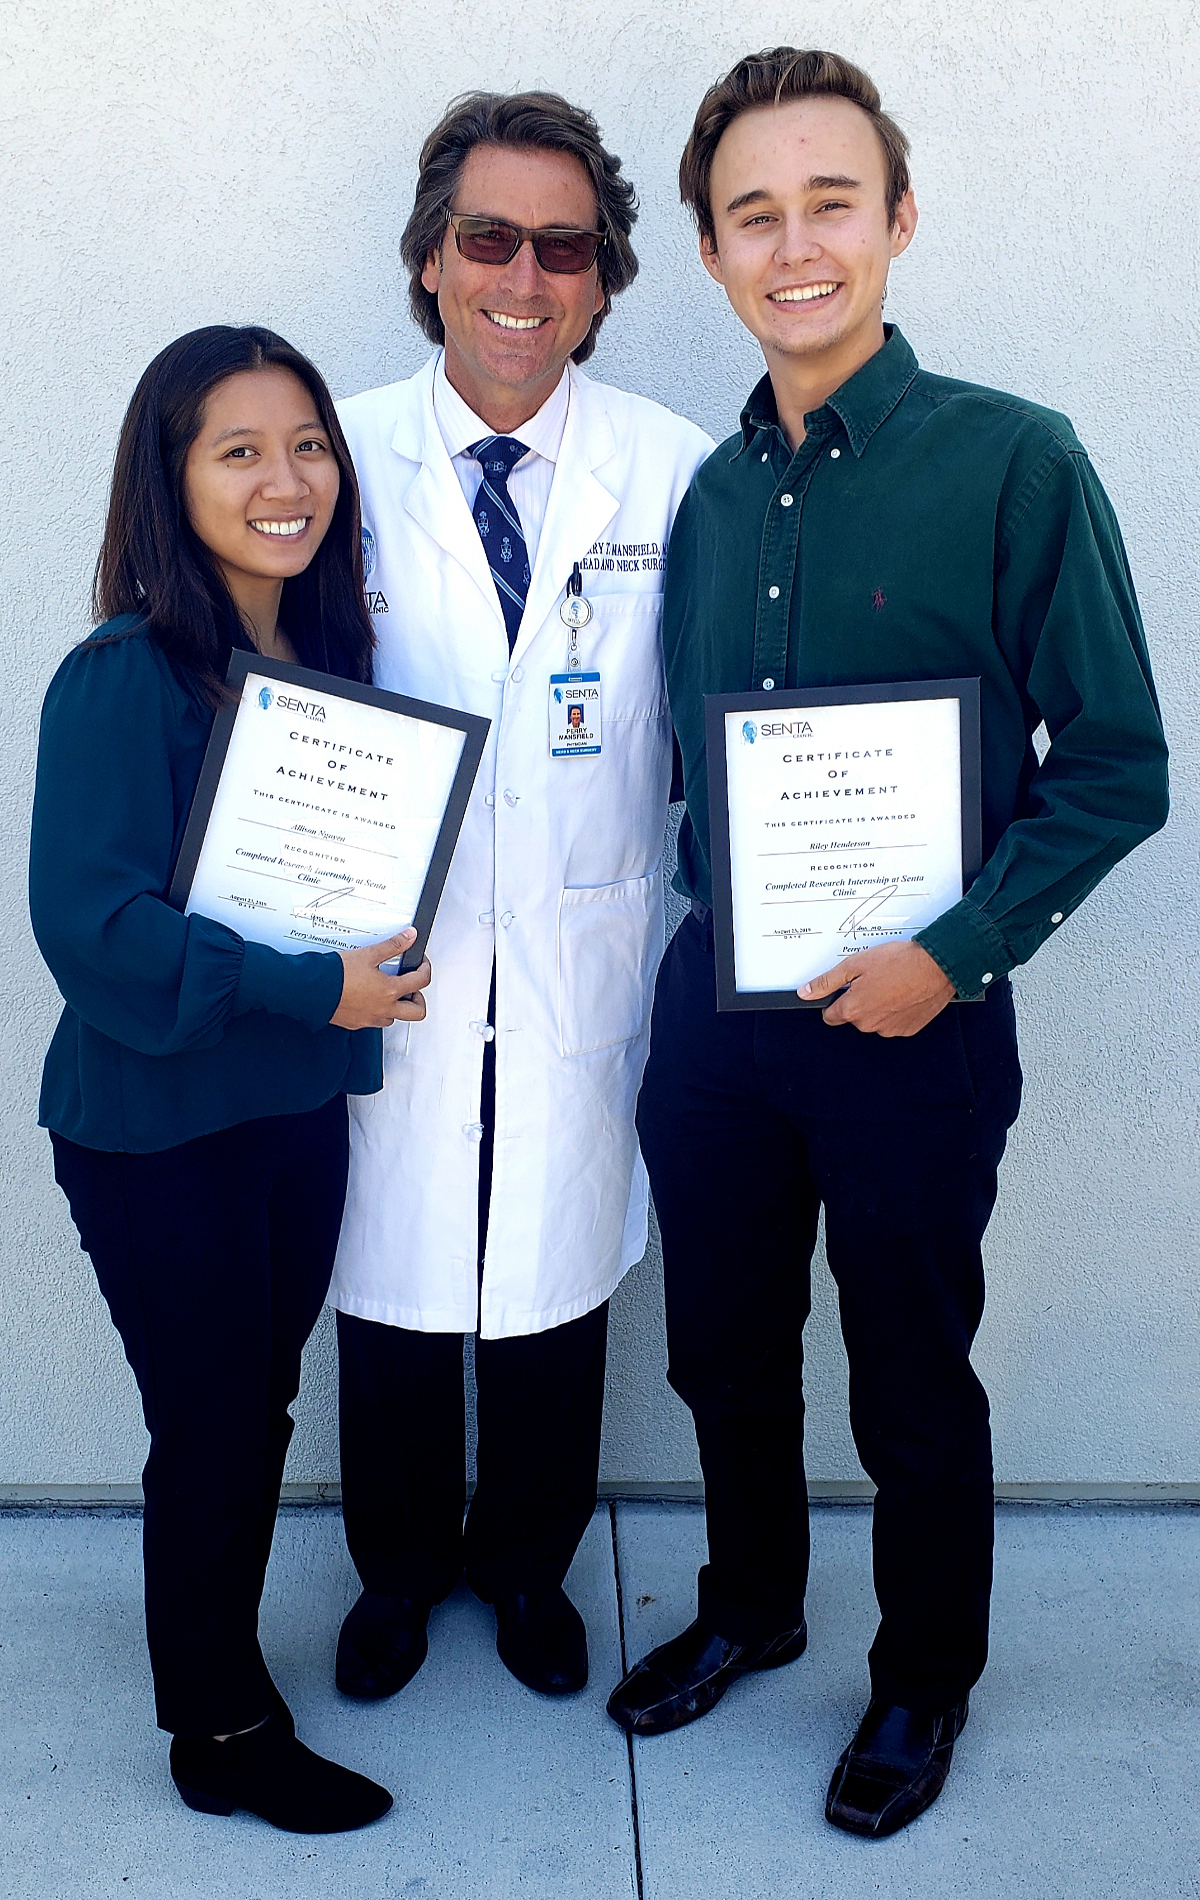 Dr. Perry with Alllison Nguyen and Riley Henderson, with their certificates of achievment.